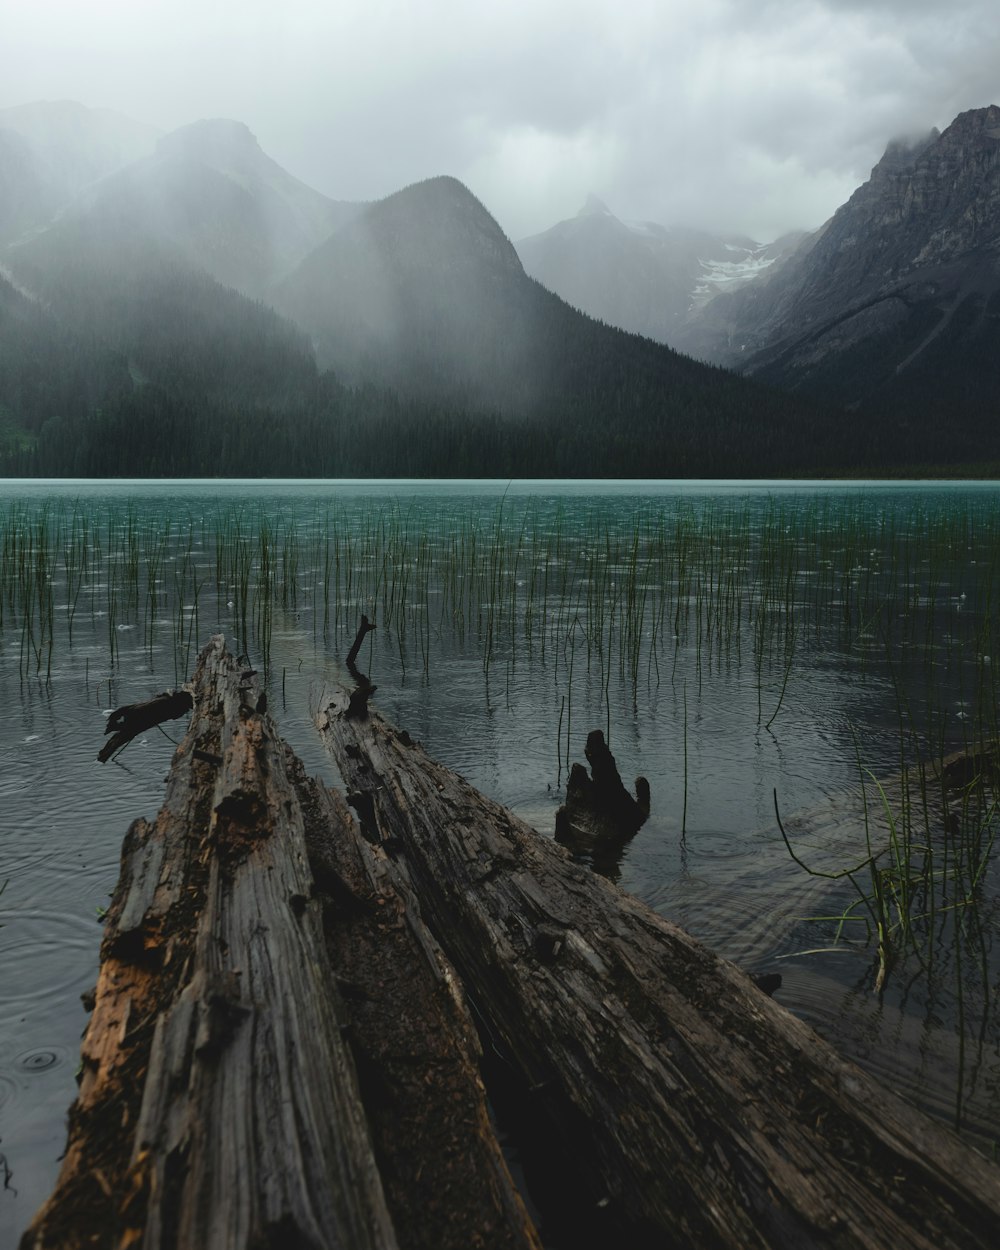 a fallen log in a lake with mountains in the background